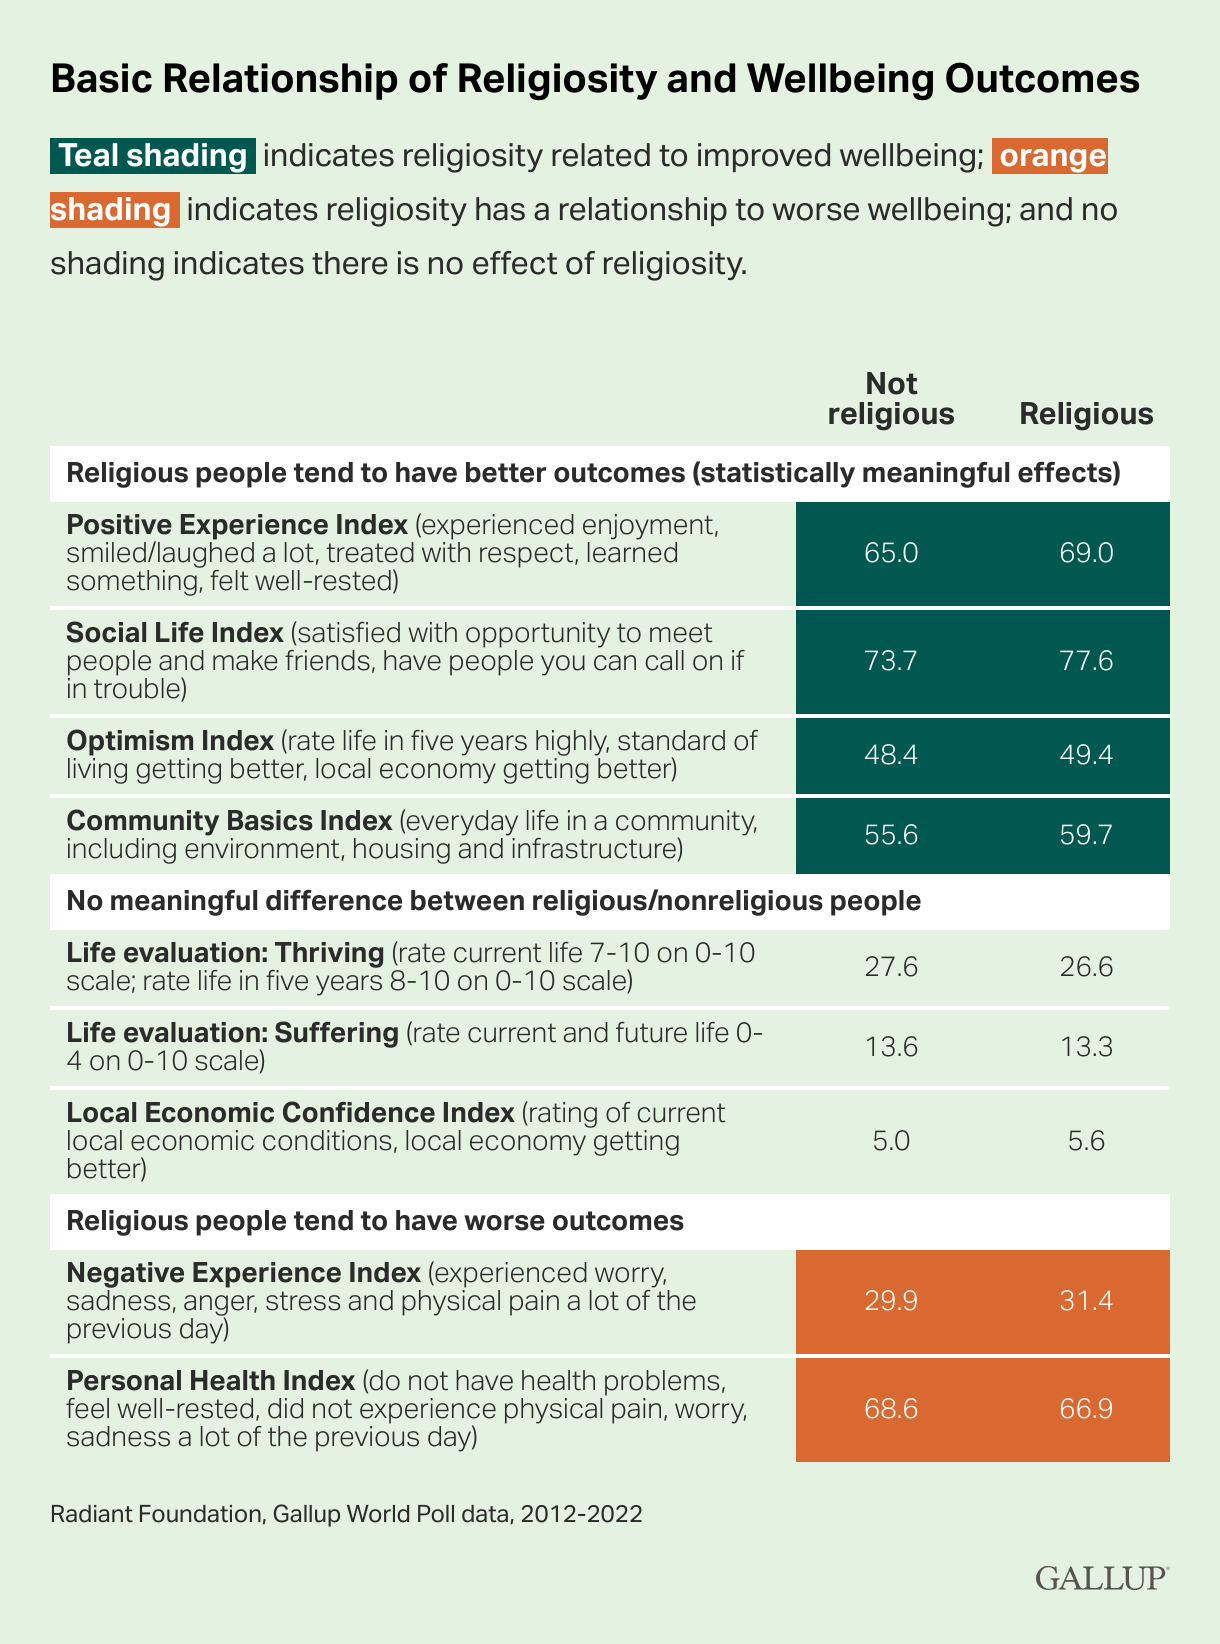 "Basic Relationship of Religiosity and Wellbeing Outcomes" Graphic courtesy Gallup